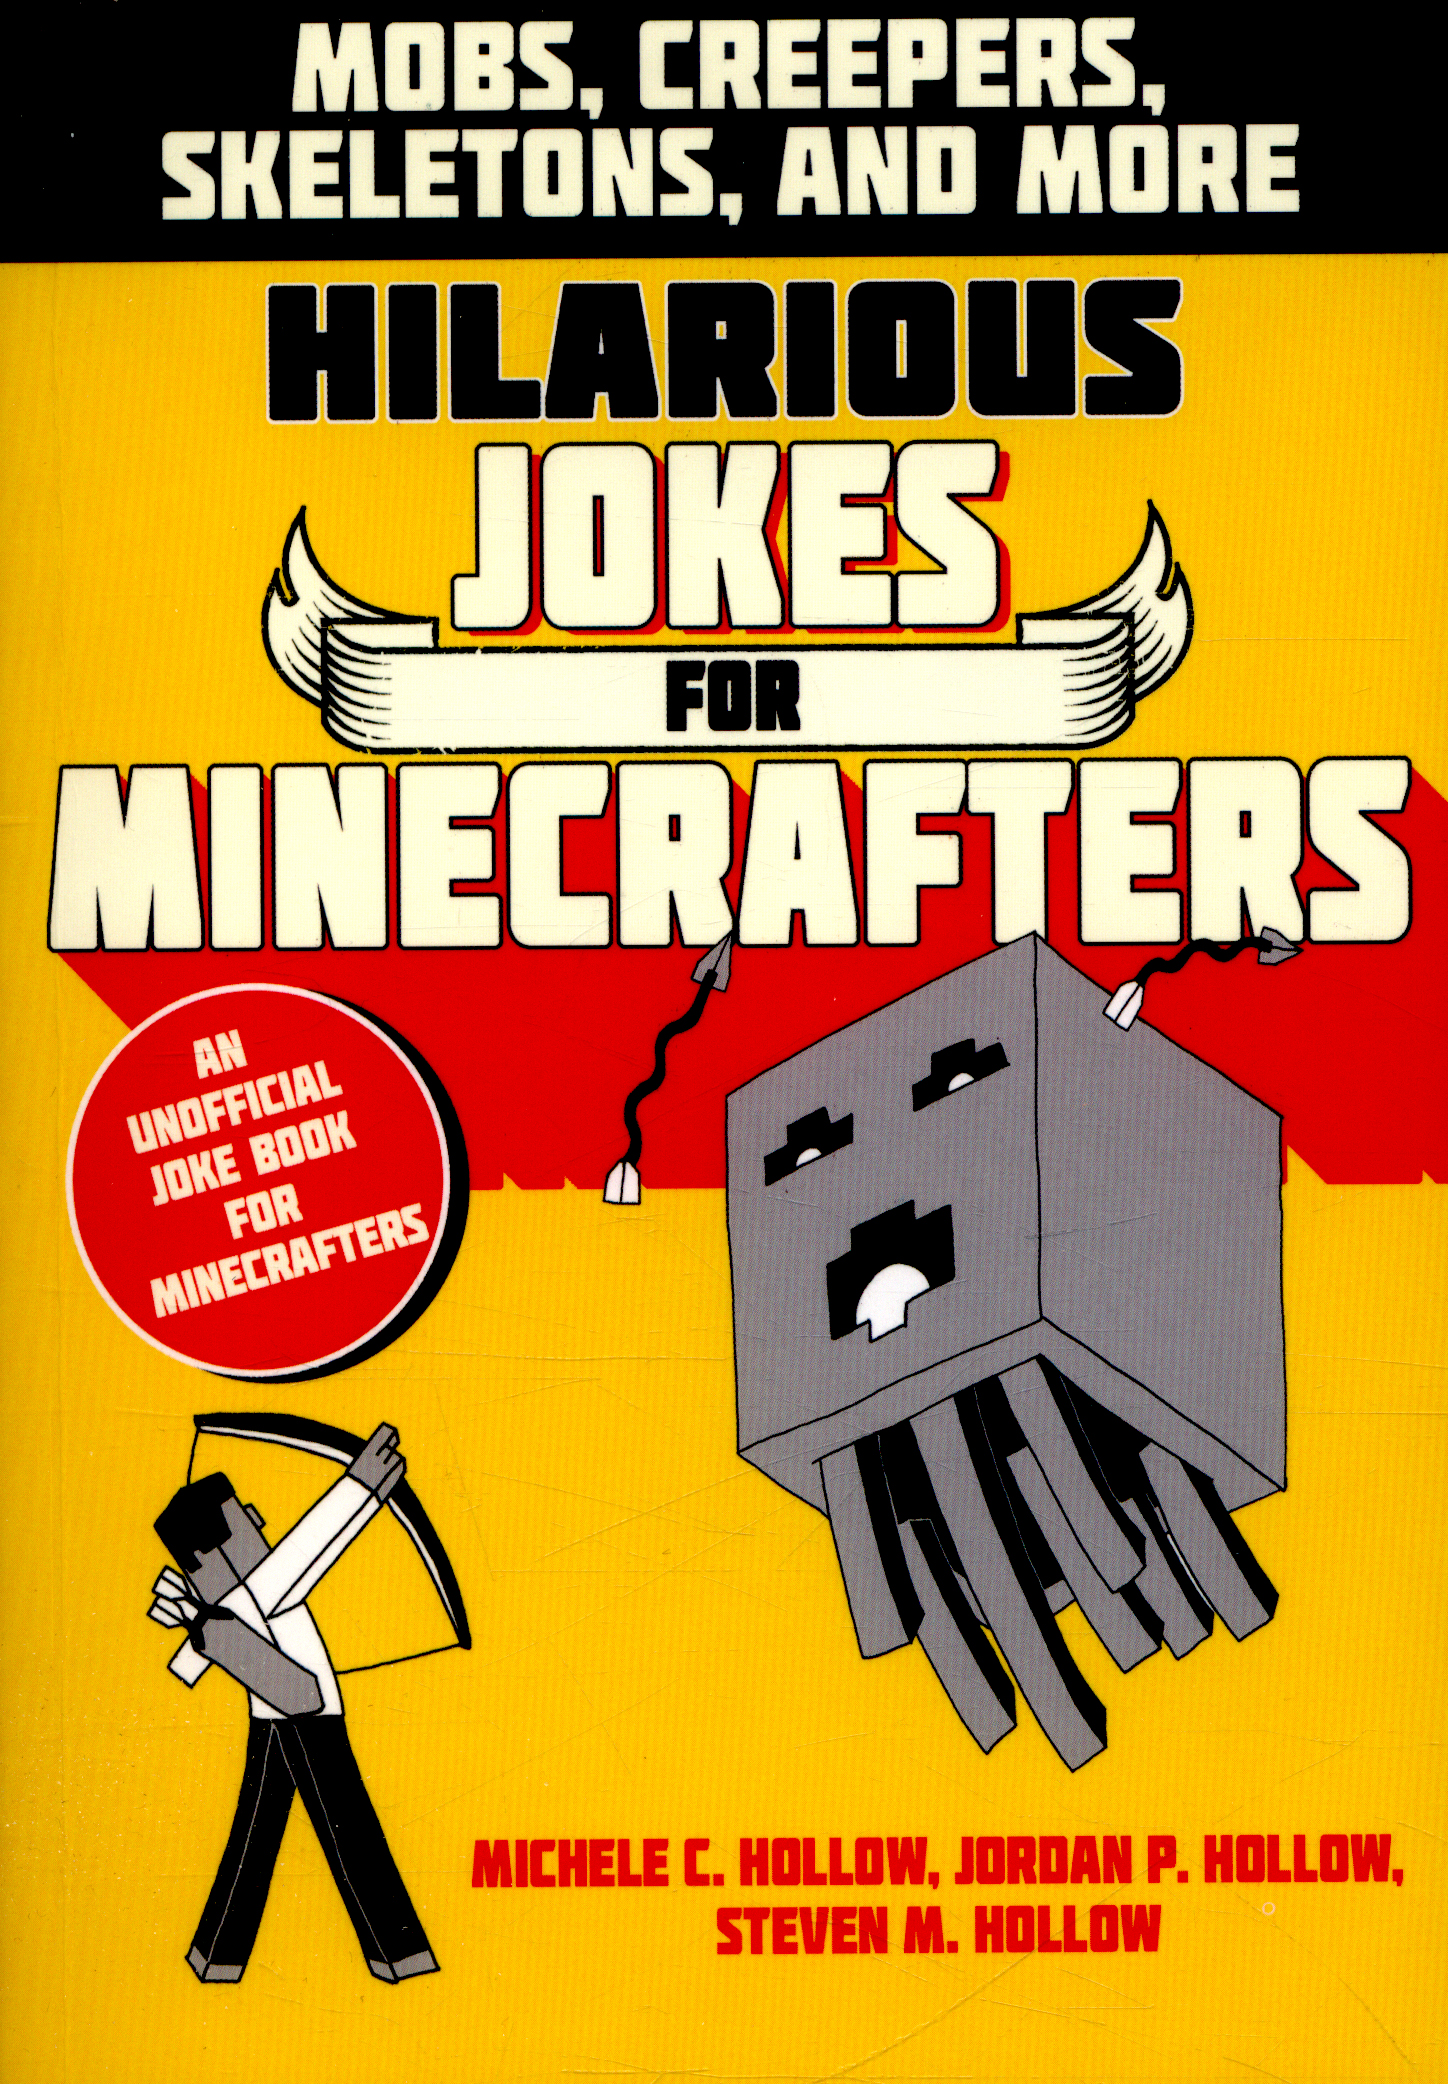 Hilarious jokes for Minecrafters Mobs, creepers, skeletons, and more